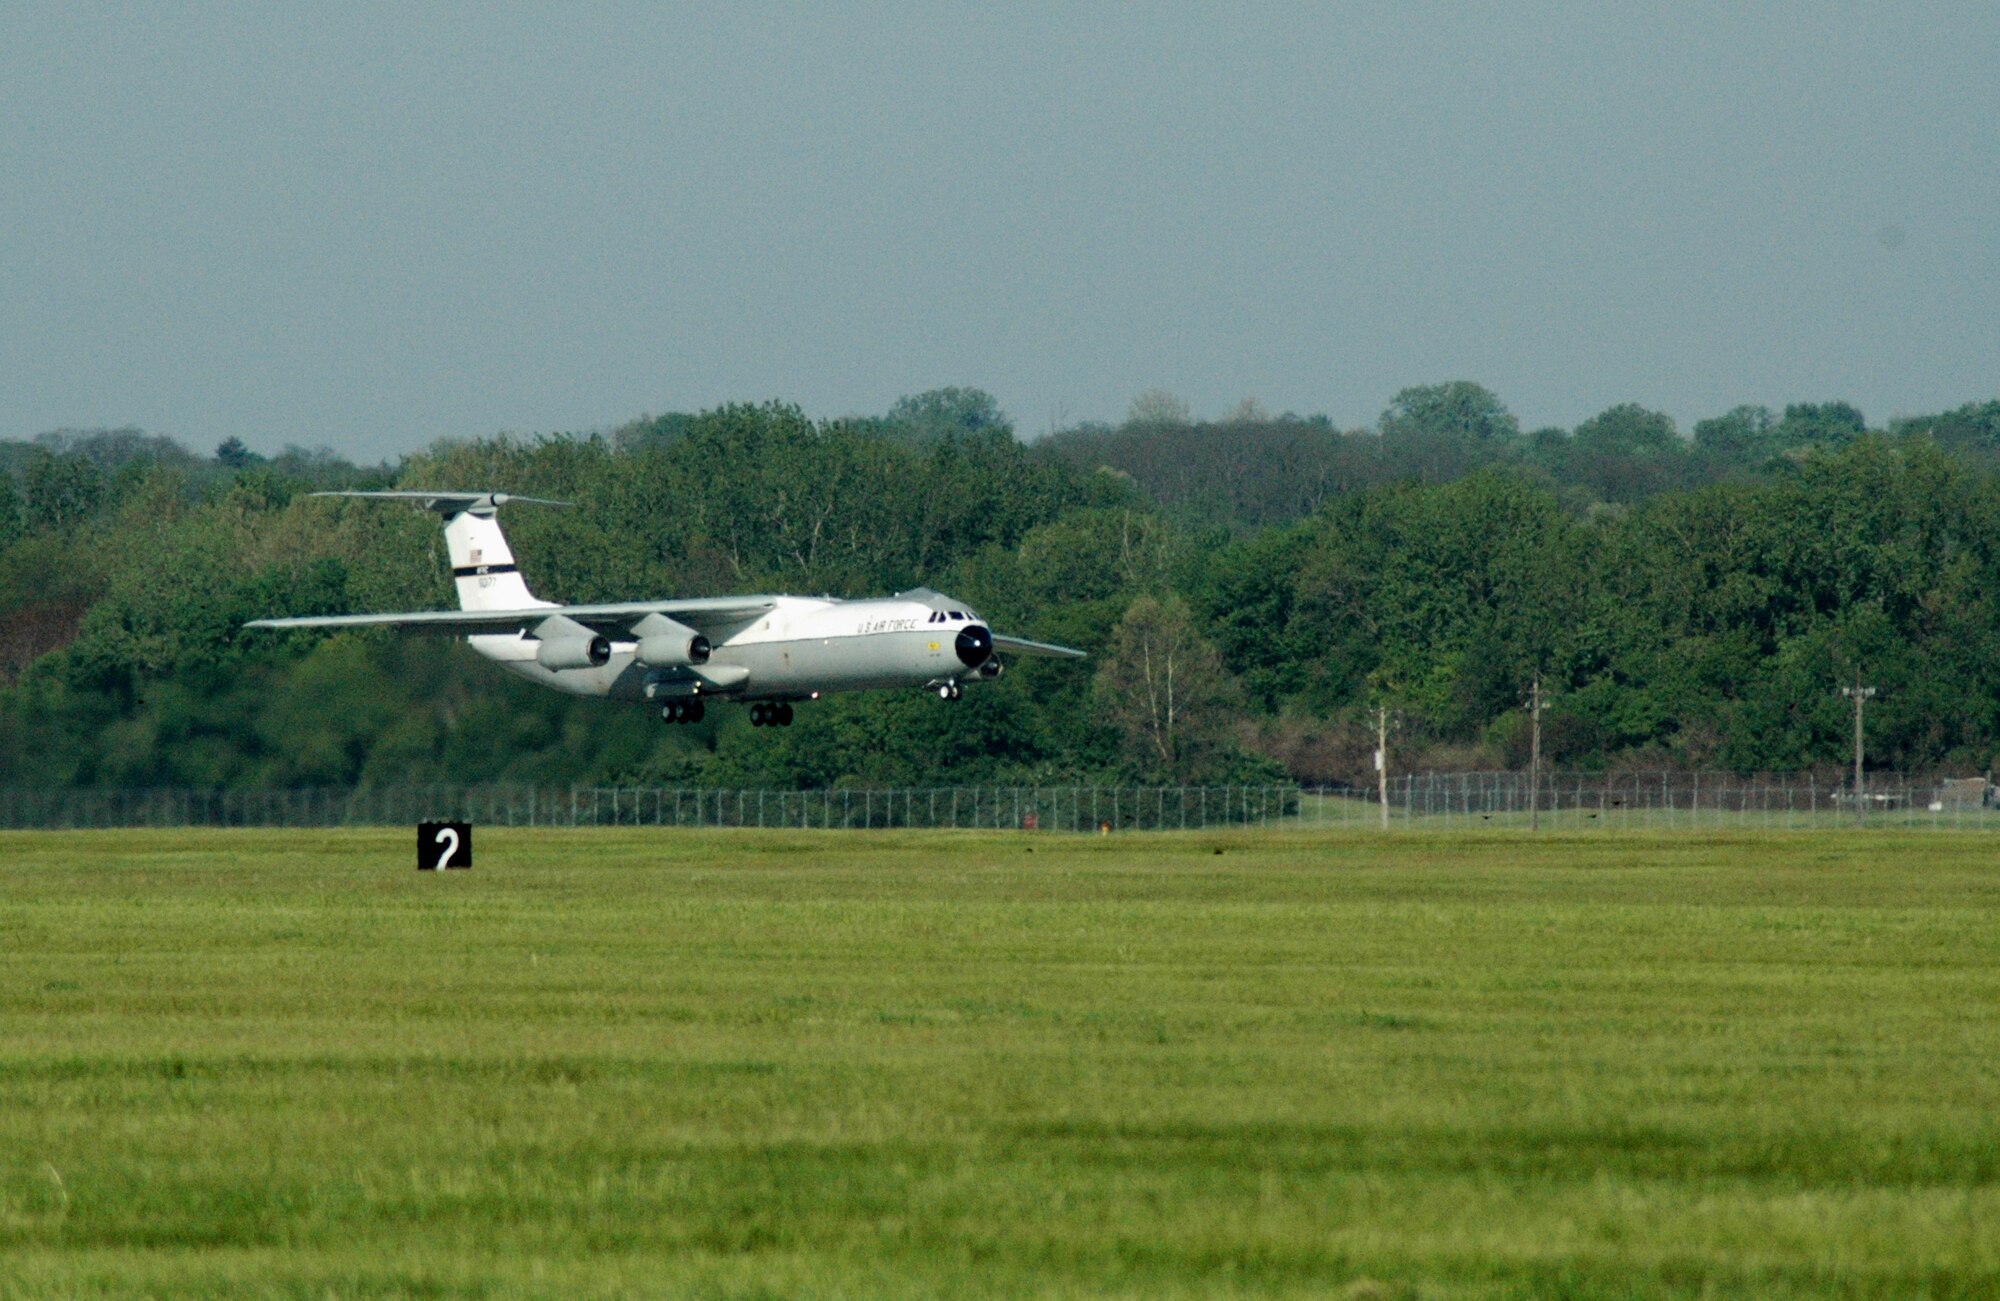 WRIGHT-PATTERSON AFB, Ohio -- The last operational C-141 Starlifter aircraft known as the Hanoi Taxi takes-off for the last time as pilots and crew members from the Air Force Reserve’s 445th Airlift Wing deliver the aircraft to the National Museum of the United States Air Force May 6, 2006. (U.S. Air Force Reserve photo by TSgt. Charlie Miller)
